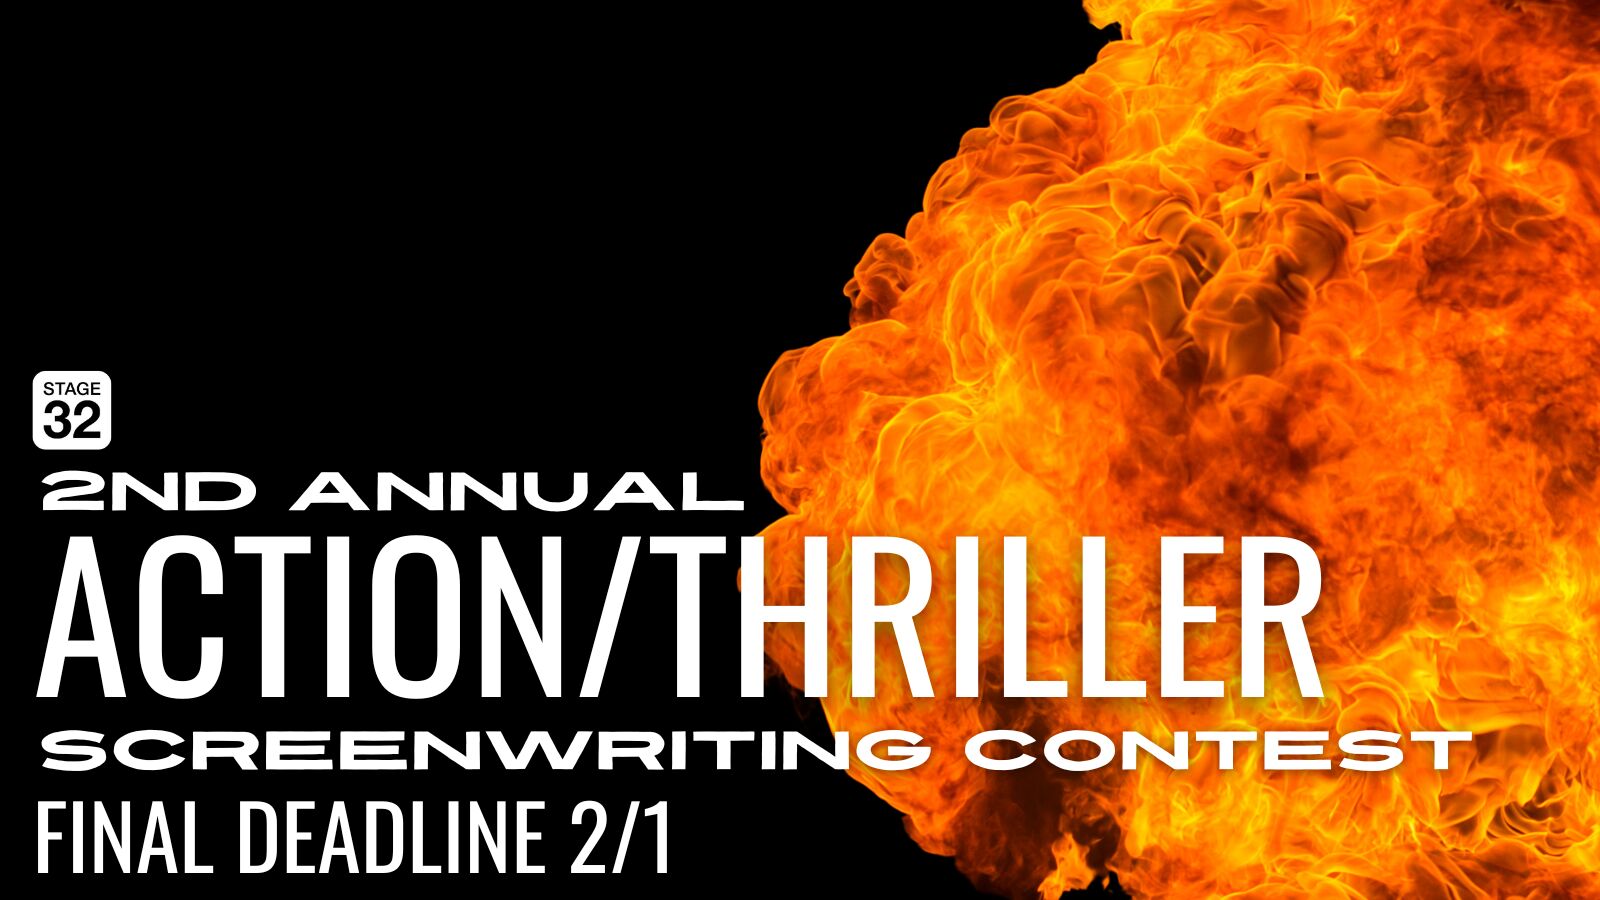 2nd Annual Action/Thriller Screenwriting Contest